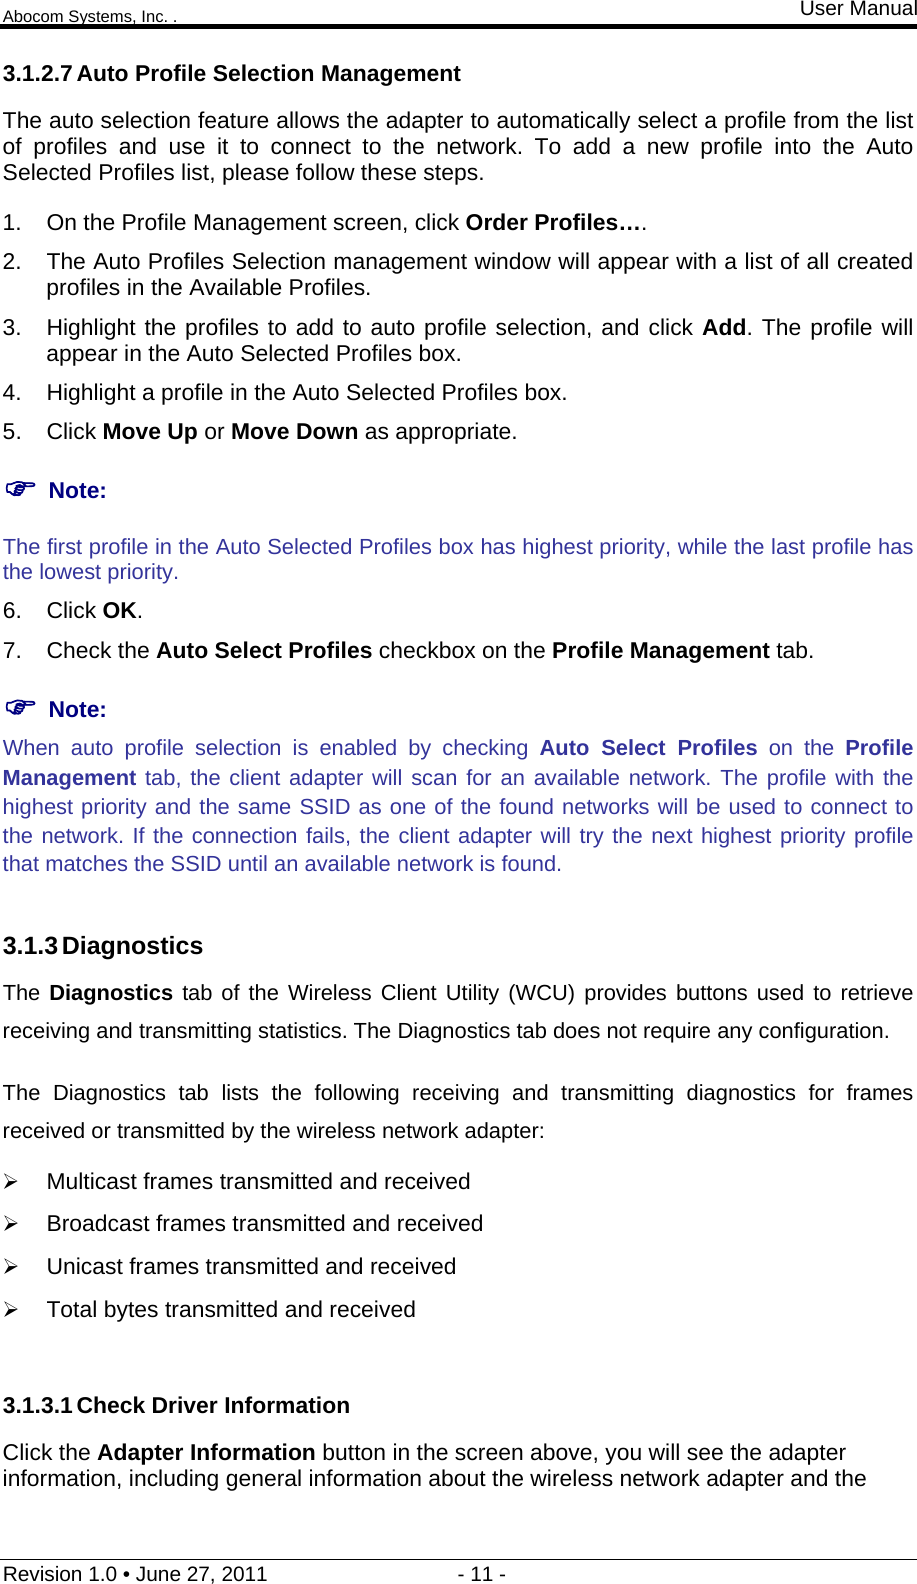 Abocom Systems, Inc. . User Manual Revision 1.0 • June 27, 2011                                 - 11 -                                                                3.1.2.7 Auto Profile Selection Management The auto selection feature allows the adapter to automatically select a profile from the list of profiles and use it to connect to the network. To add a new profile into the Auto Selected Profiles list, please follow these steps. 1.  On the Profile Management screen, click Order Profiles…. 2.  The Auto Profiles Selection management window will appear with a list of all created profiles in the Available Profiles. 3.  Highlight the profiles to add to auto profile selection, and click Add. The profile will appear in the Auto Selected Profiles box. 4.  Highlight a profile in the Auto Selected Profiles box. 5. Click Move Up or Move Down as appropriate.   Note: The first profile in the Auto Selected Profiles box has highest priority, while the last profile has the lowest priority. 6. Click OK. 7. Check the Auto Select Profiles checkbox on the Profile Management tab.  Note: When auto profile selection is enabled by checking Auto Select Profiles on the Profile Management tab, the client adapter will scan for an available network. The profile with the highest priority and the same SSID as one of the found networks will be used to connect to the network. If the connection fails, the client adapter will try the next highest priority profile that matches the SSID until an available network is found.  3.1.3 Diagnostics The Diagnostics tab of the Wireless Client Utility (WCU) provides buttons used to retrieve receiving and transmitting statistics. The Diagnostics tab does not require any configuration. The Diagnostics tab lists the following receiving and transmitting diagnostics for frames received or transmitted by the wireless network adapter:  Multicast frames transmitted and received   Broadcast frames transmitted and received   Unicast frames transmitted and received   Total bytes transmitted and received  3.1.3.1 Check Driver Information Click the Adapter Information button in the screen above, you will see the adapter information, including general information about the wireless network adapter and the 